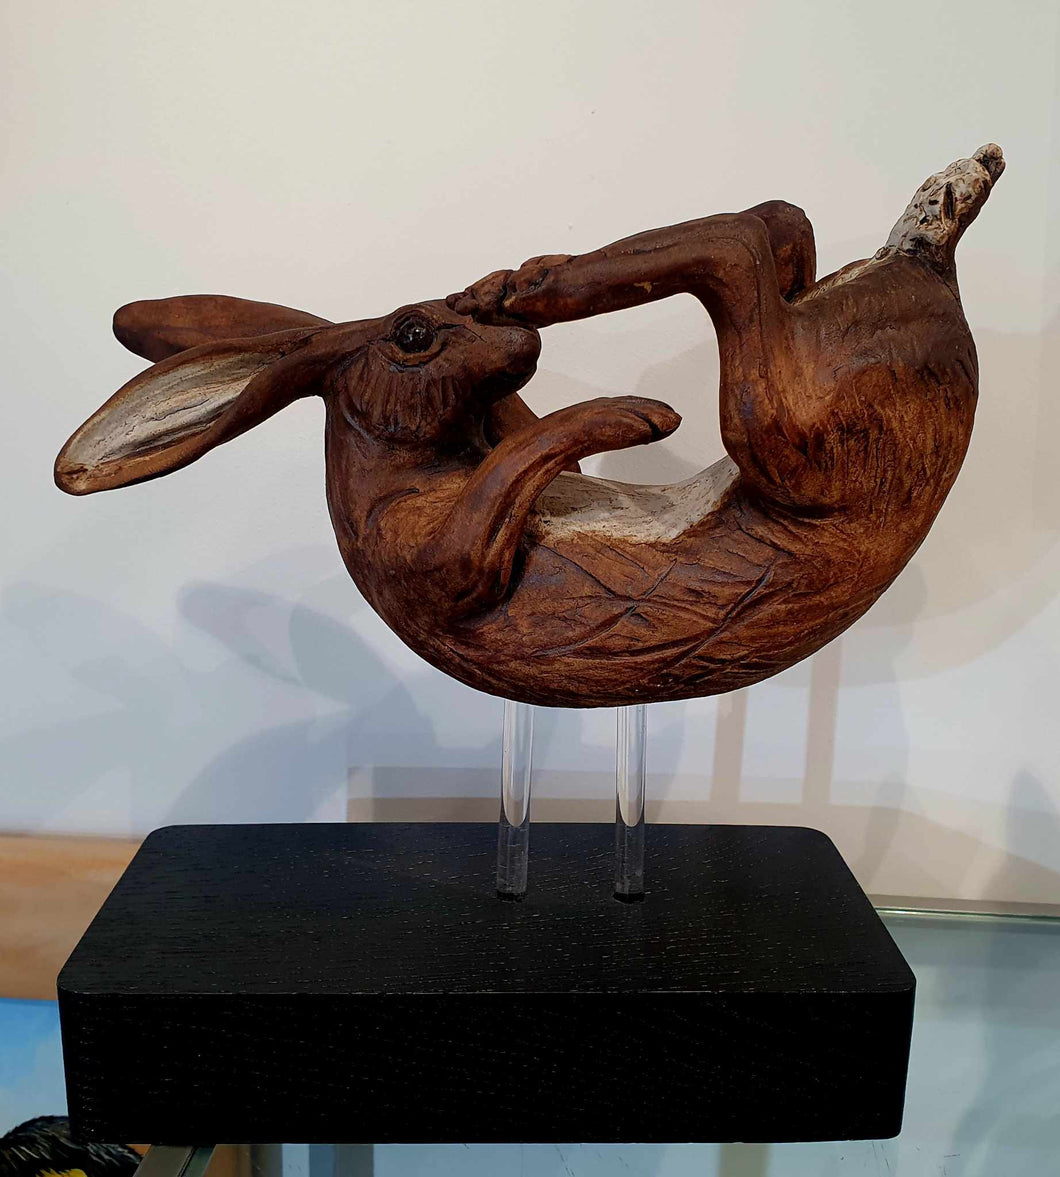 Tumbling Hare ceramic by Pippa hill